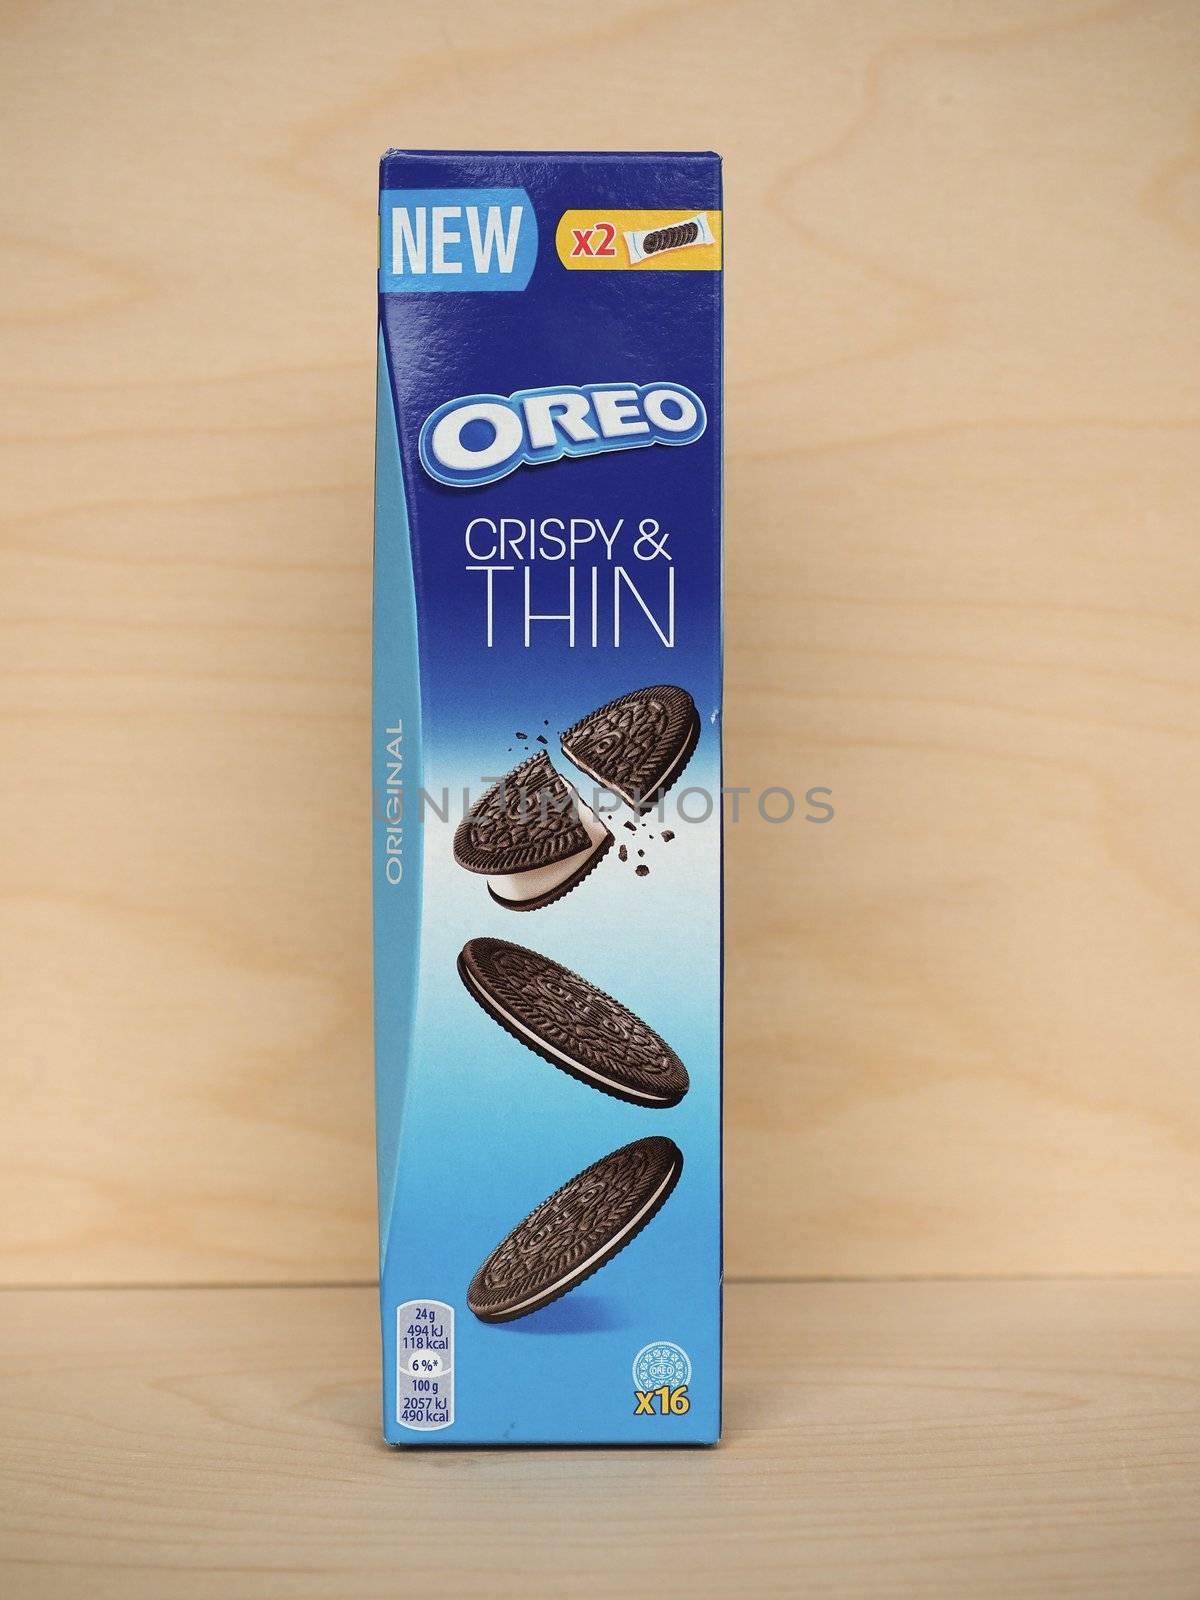 EAST HANOVER - MAY 2020: Oreo biscuits packet by claudiodivizia